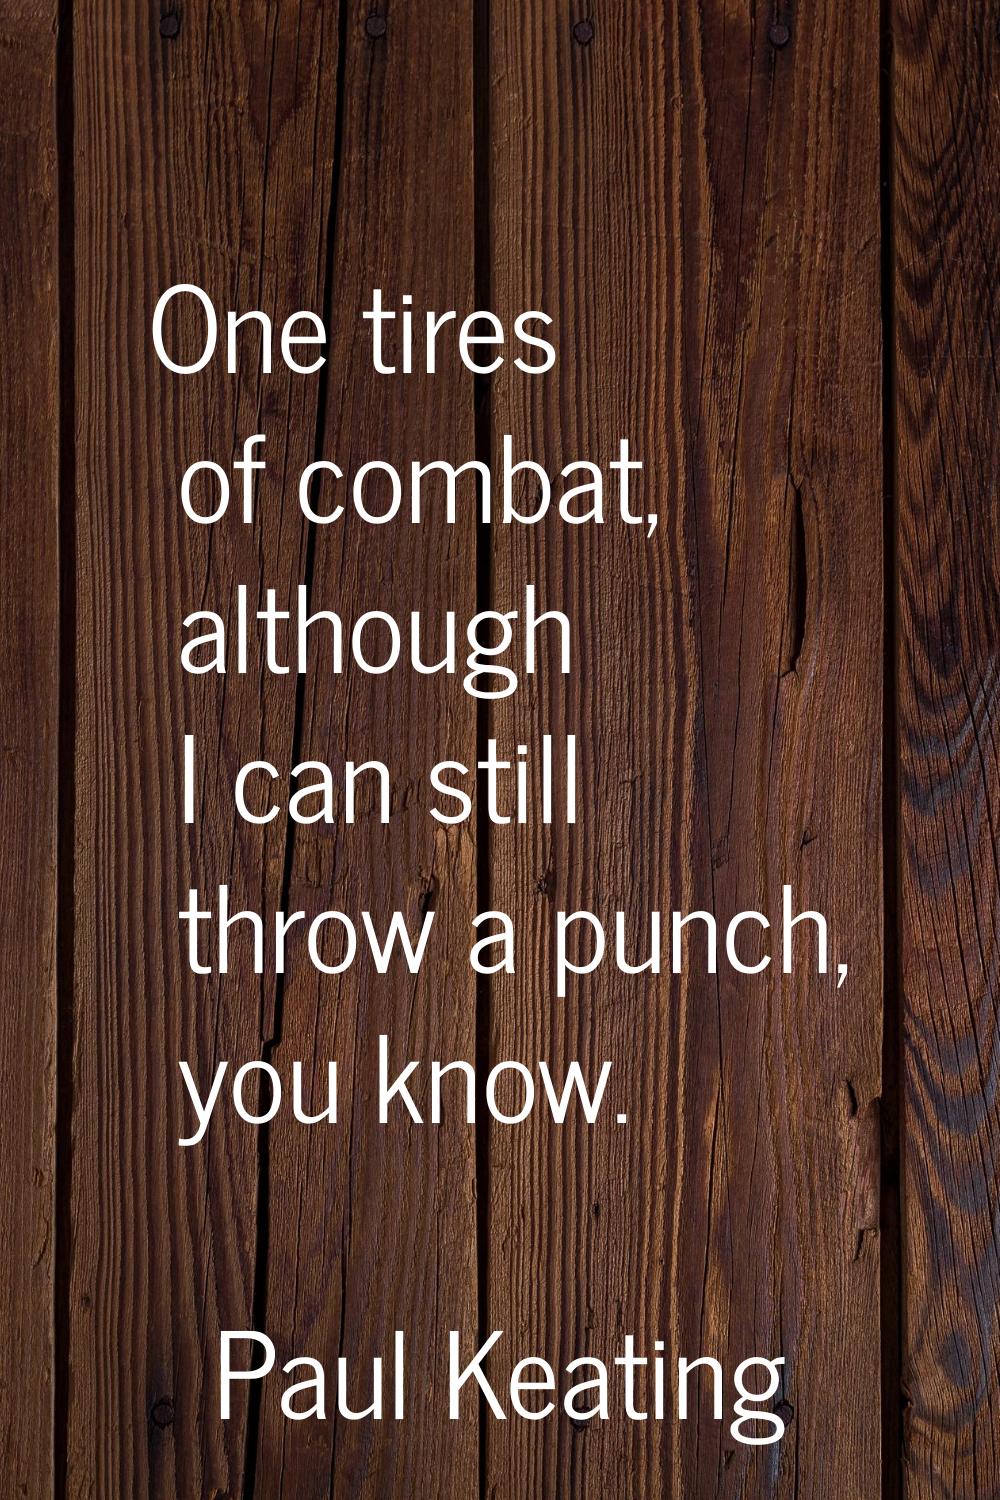 One tires of combat, although I can still throw a punch, you know.